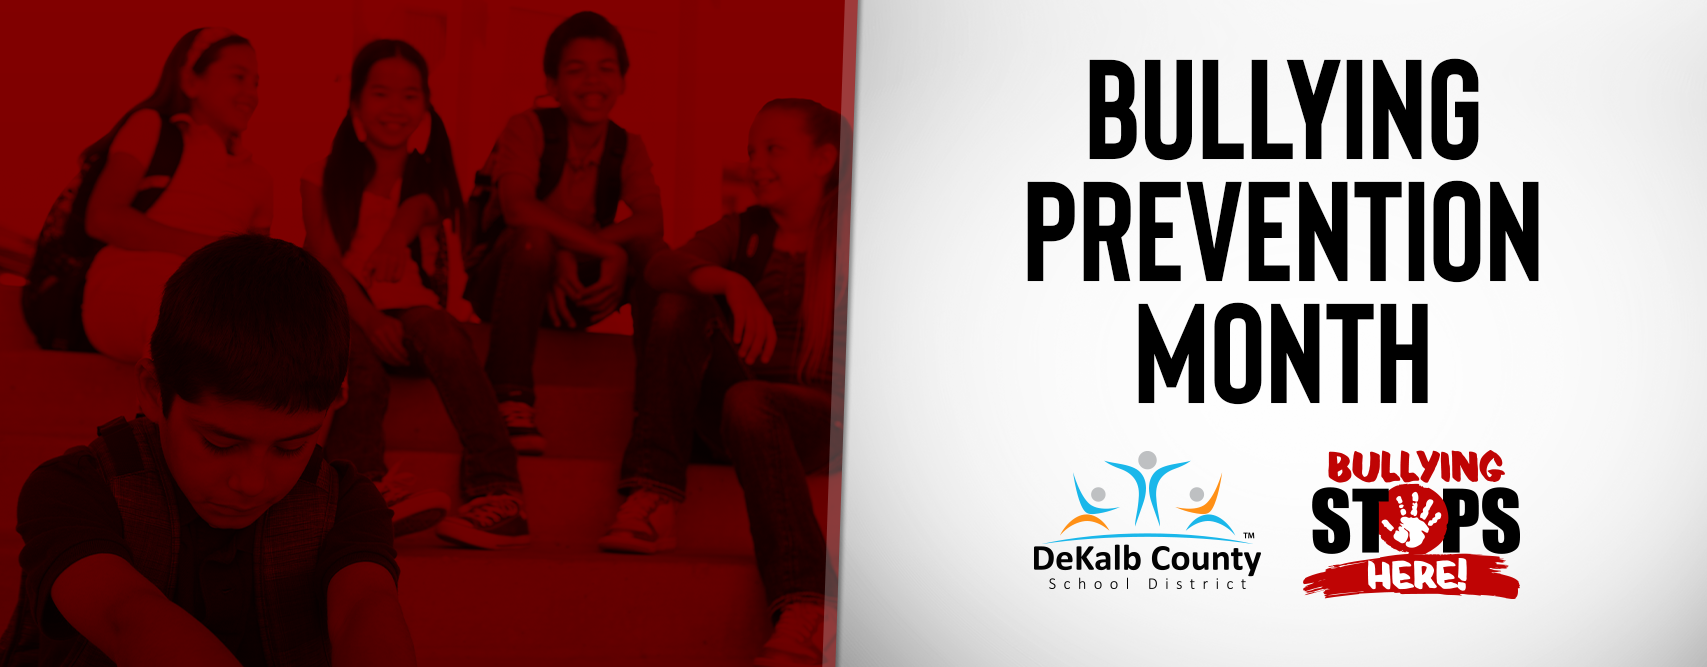 Bullying prevention month